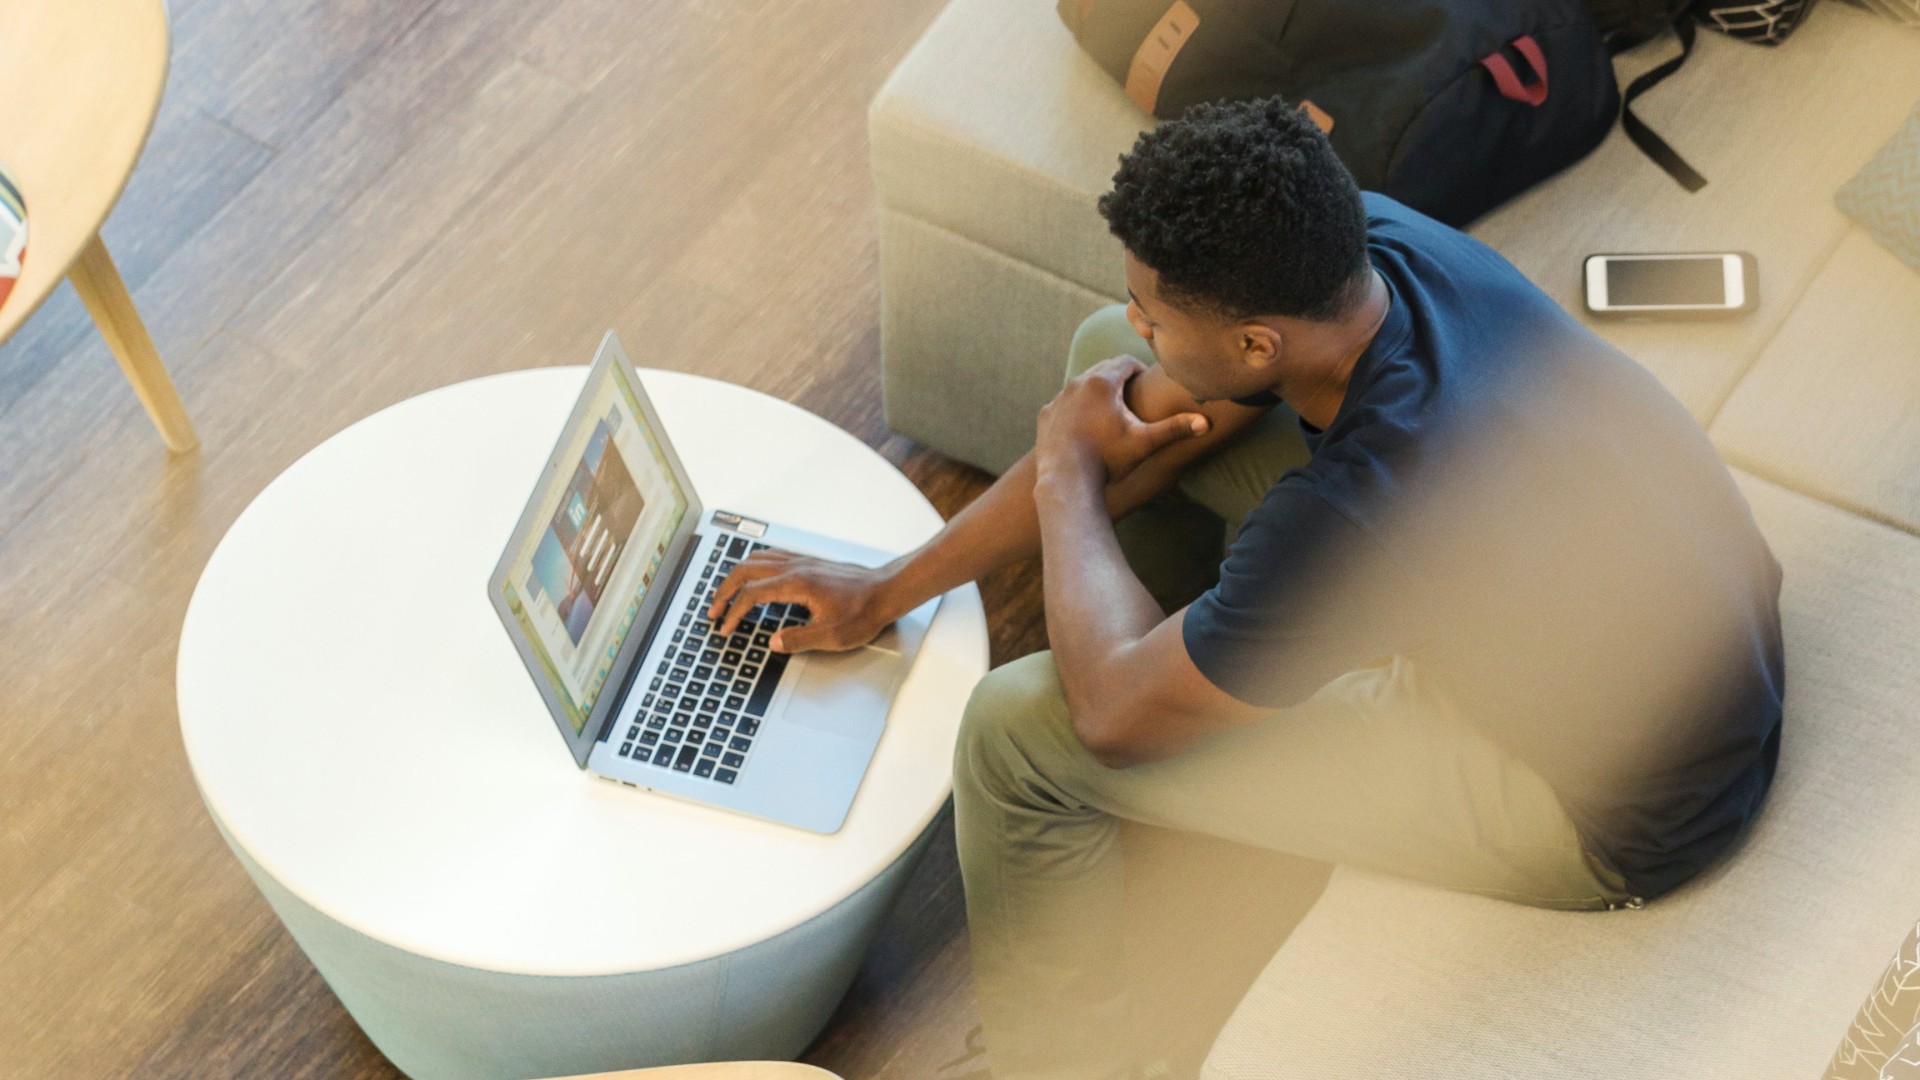 A dark-skinned man working on a laptop